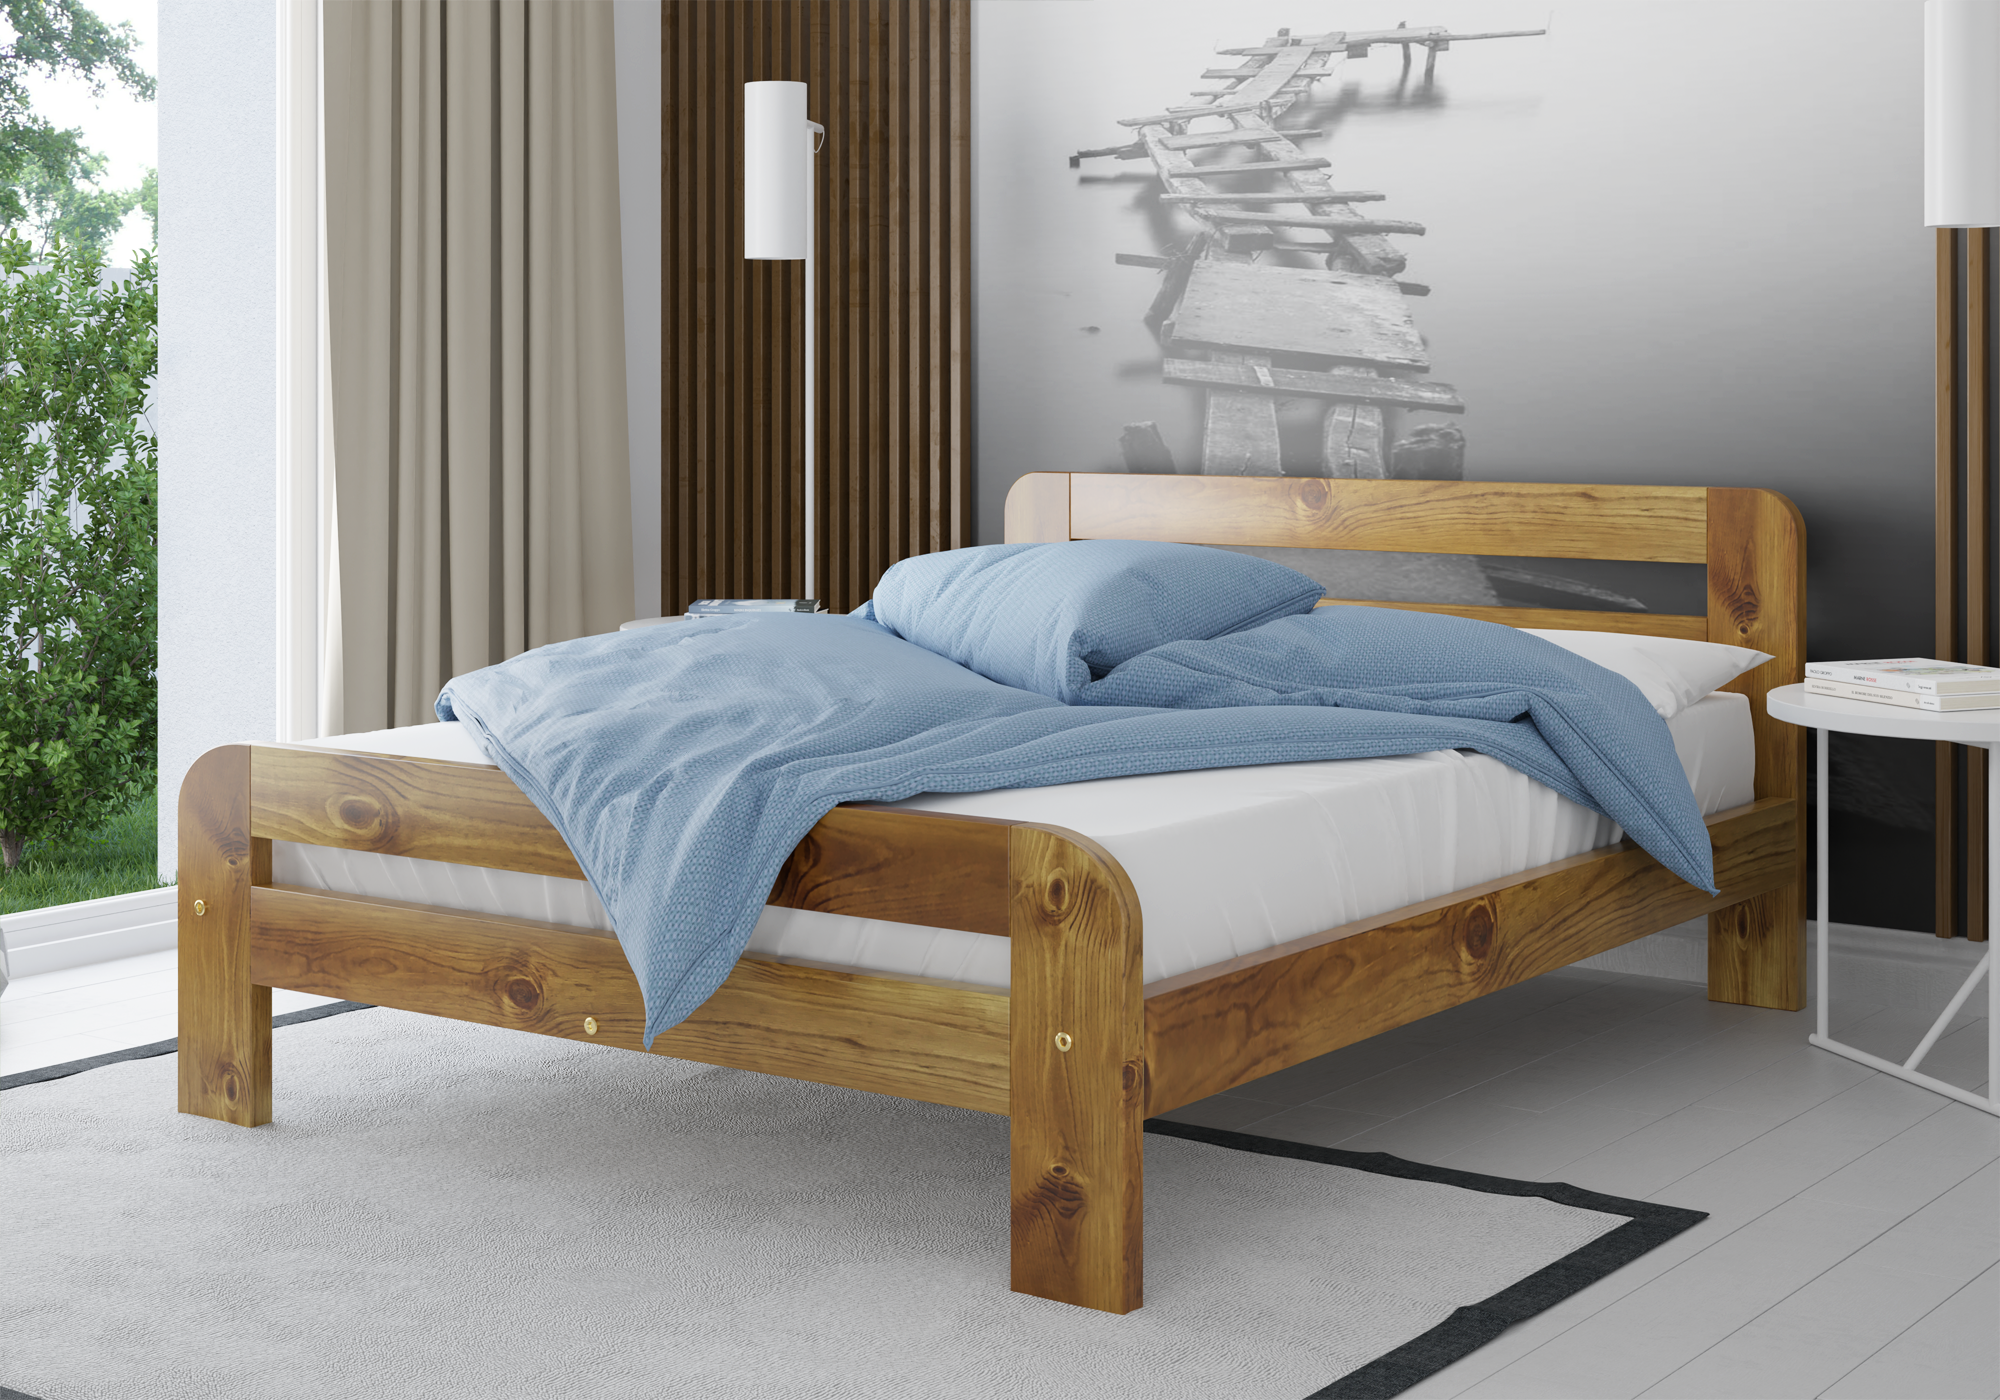 5ft-Wooden-bed-with-slats